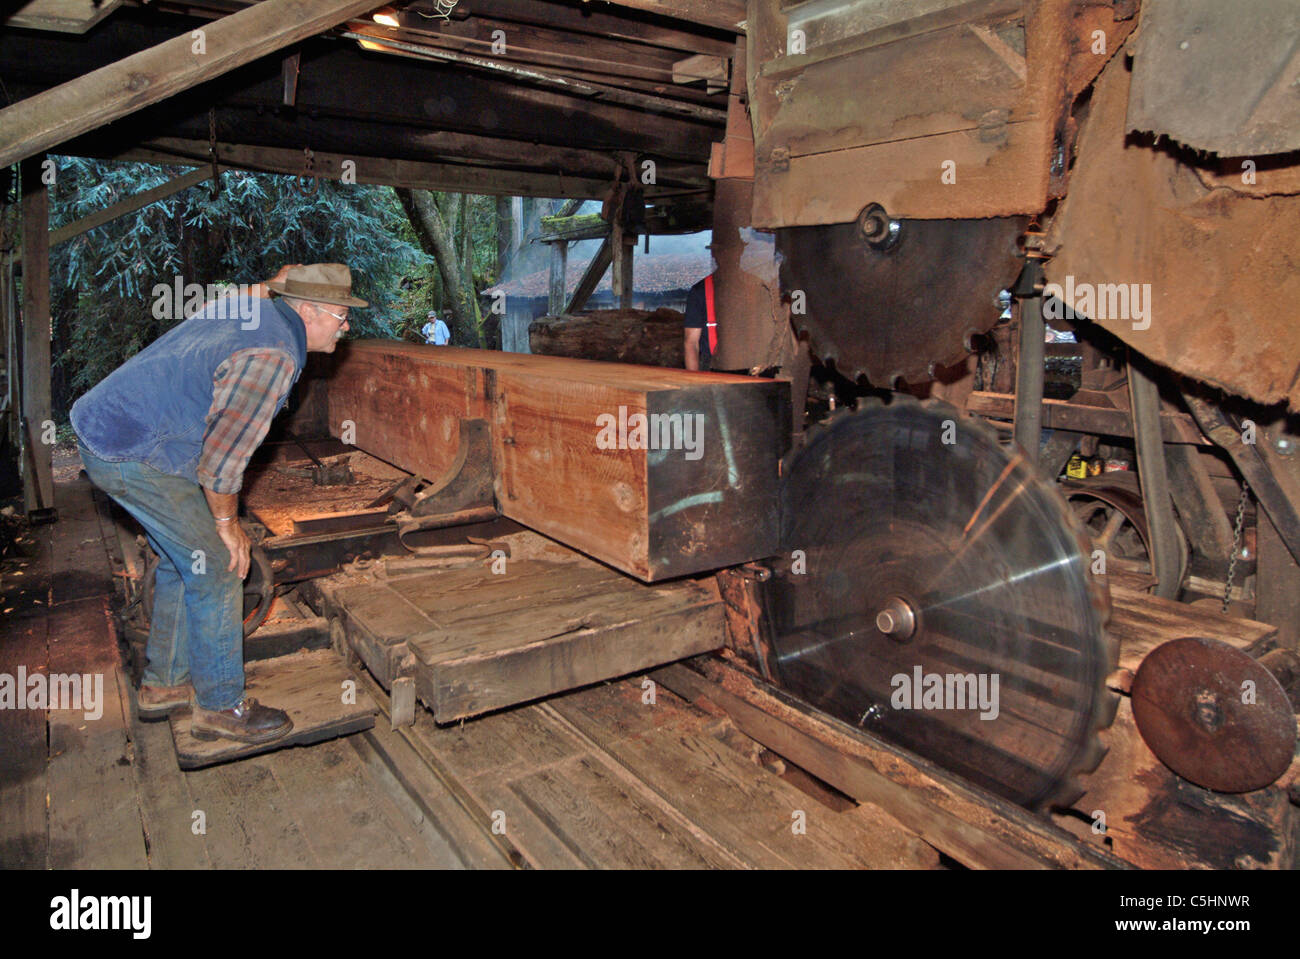 A saw mill worker is beginning the first cut of the trimmed redwood log at an antique saw mill in Occidental California Stock Photo